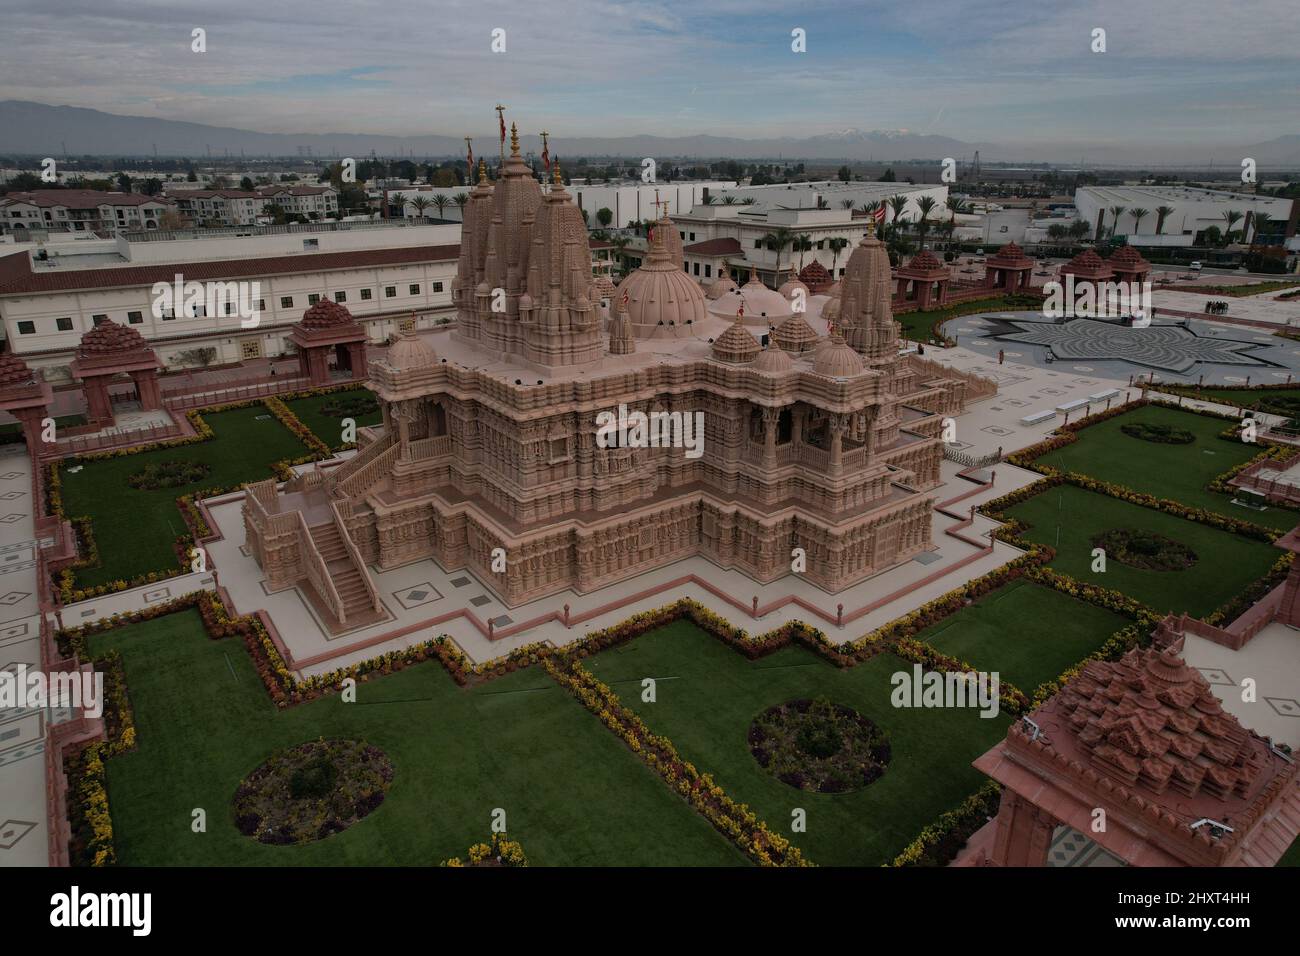 An aerial drone view of the religious temple Swaminarayan Akshardham in Delhi, India Stock Photo